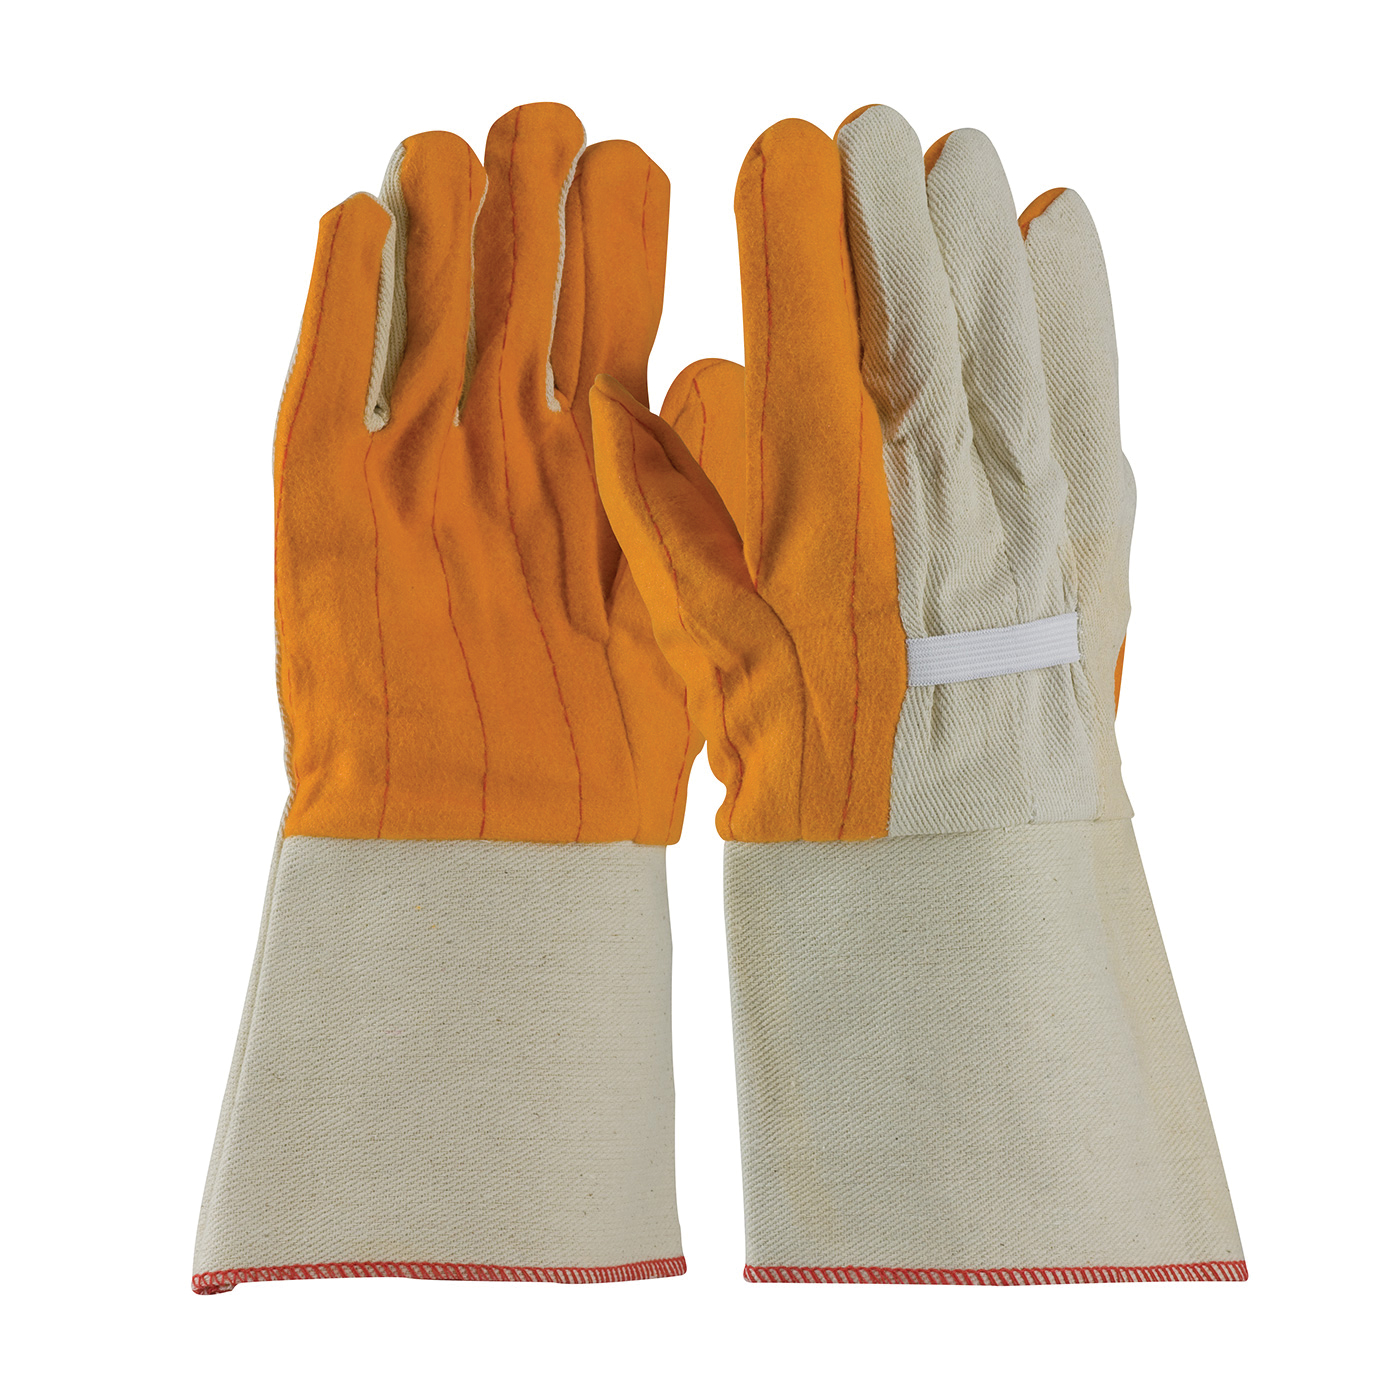 PIP® 93-578G Men's Premium Grade General Purpose Gloves, Fabric/Work, Cotton Palm, Cotton, Gold, Gauntlet Cuff, Uncoated Coating, Resists: Heat, Cotton Lining, Clute Cut/Full Finger/Nap-Out/Straight Thumb